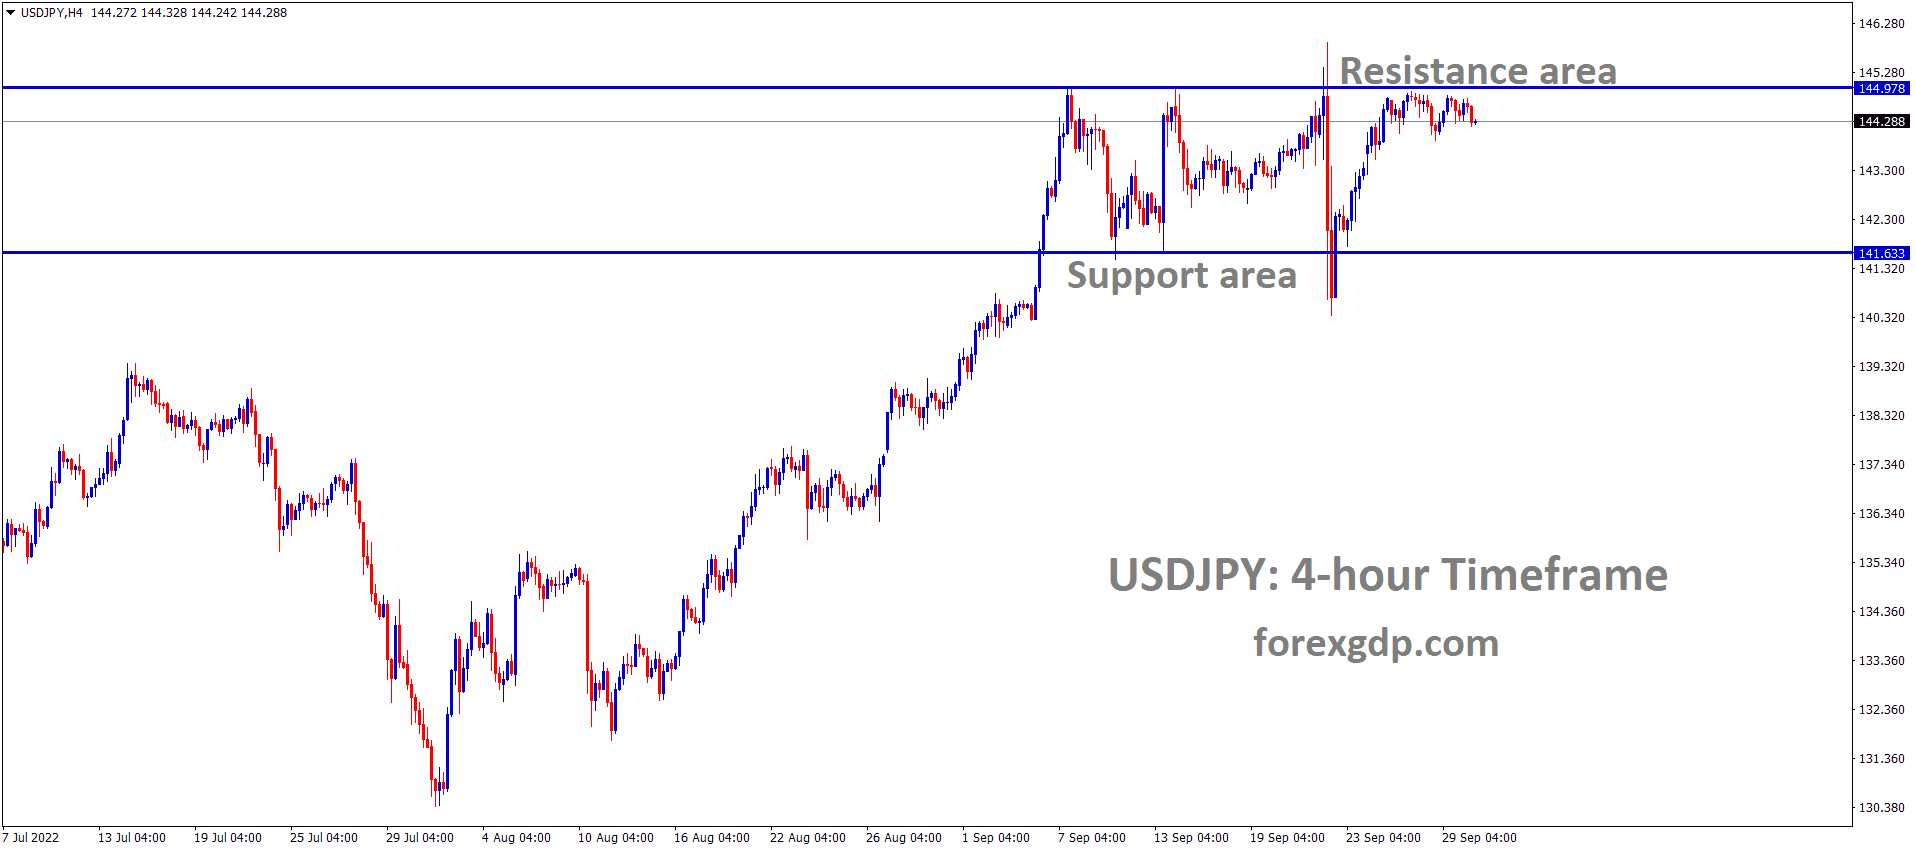 USDJPY is moving in the Box pattern and the market has fallen from the resistance area of the pattern 2